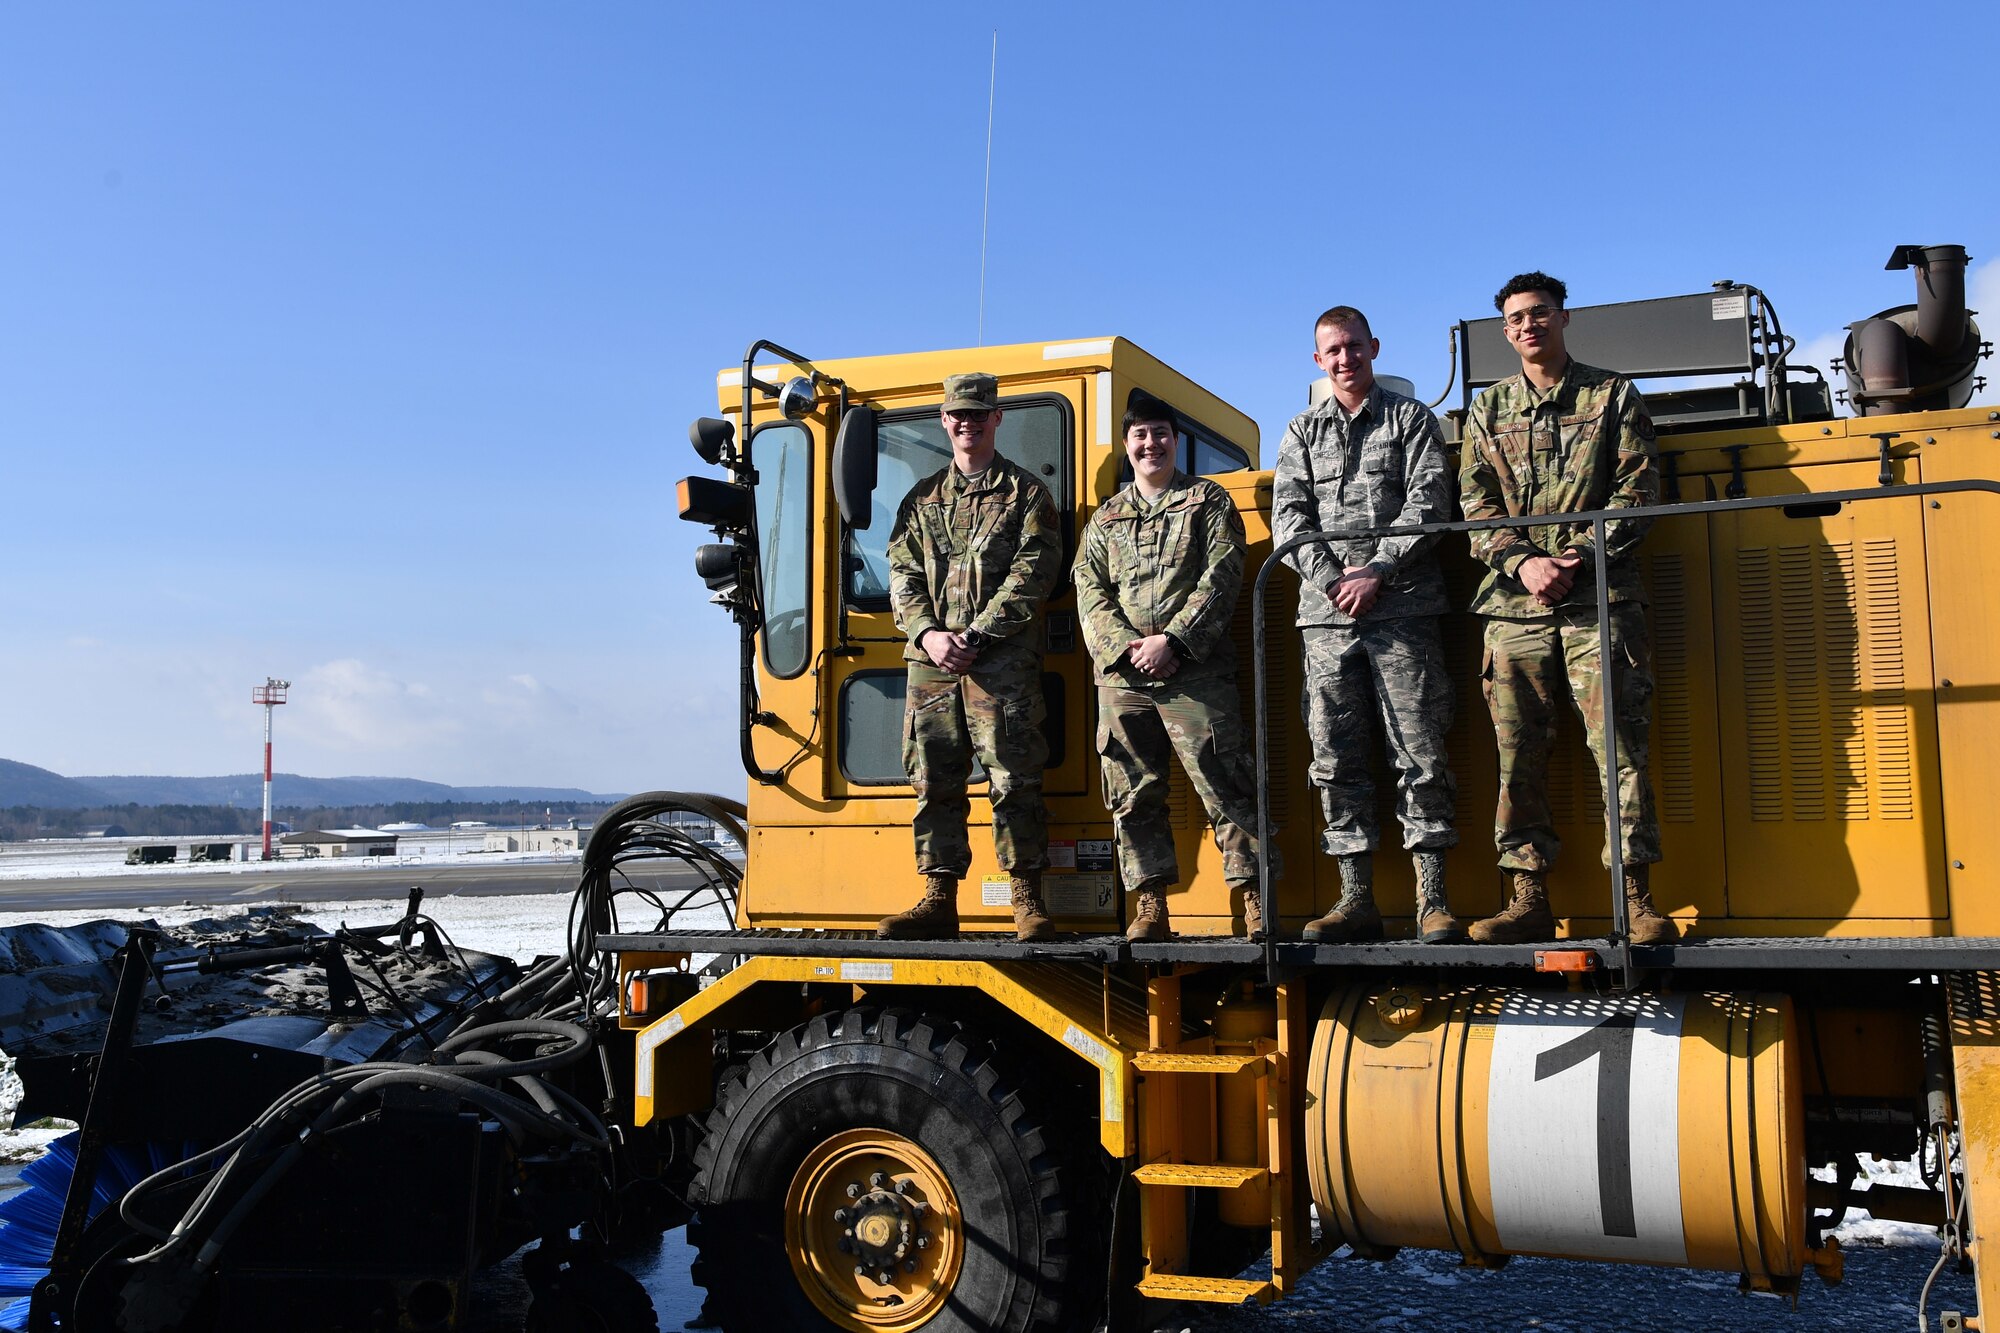 U.S. Air Force Airman Noah Carney, left, Senior Airman Amber Ingalls, Airman 1st Class Charles Zine and Airman 1st Class Ronald Williamson, 786th Civil Engineer Squadron pavements and equipment operators, pose for a photo on an Oshkosh Snow Broom snow removal vehicle at Ramstein Air Base, Germany, Feb. 28, 2020.